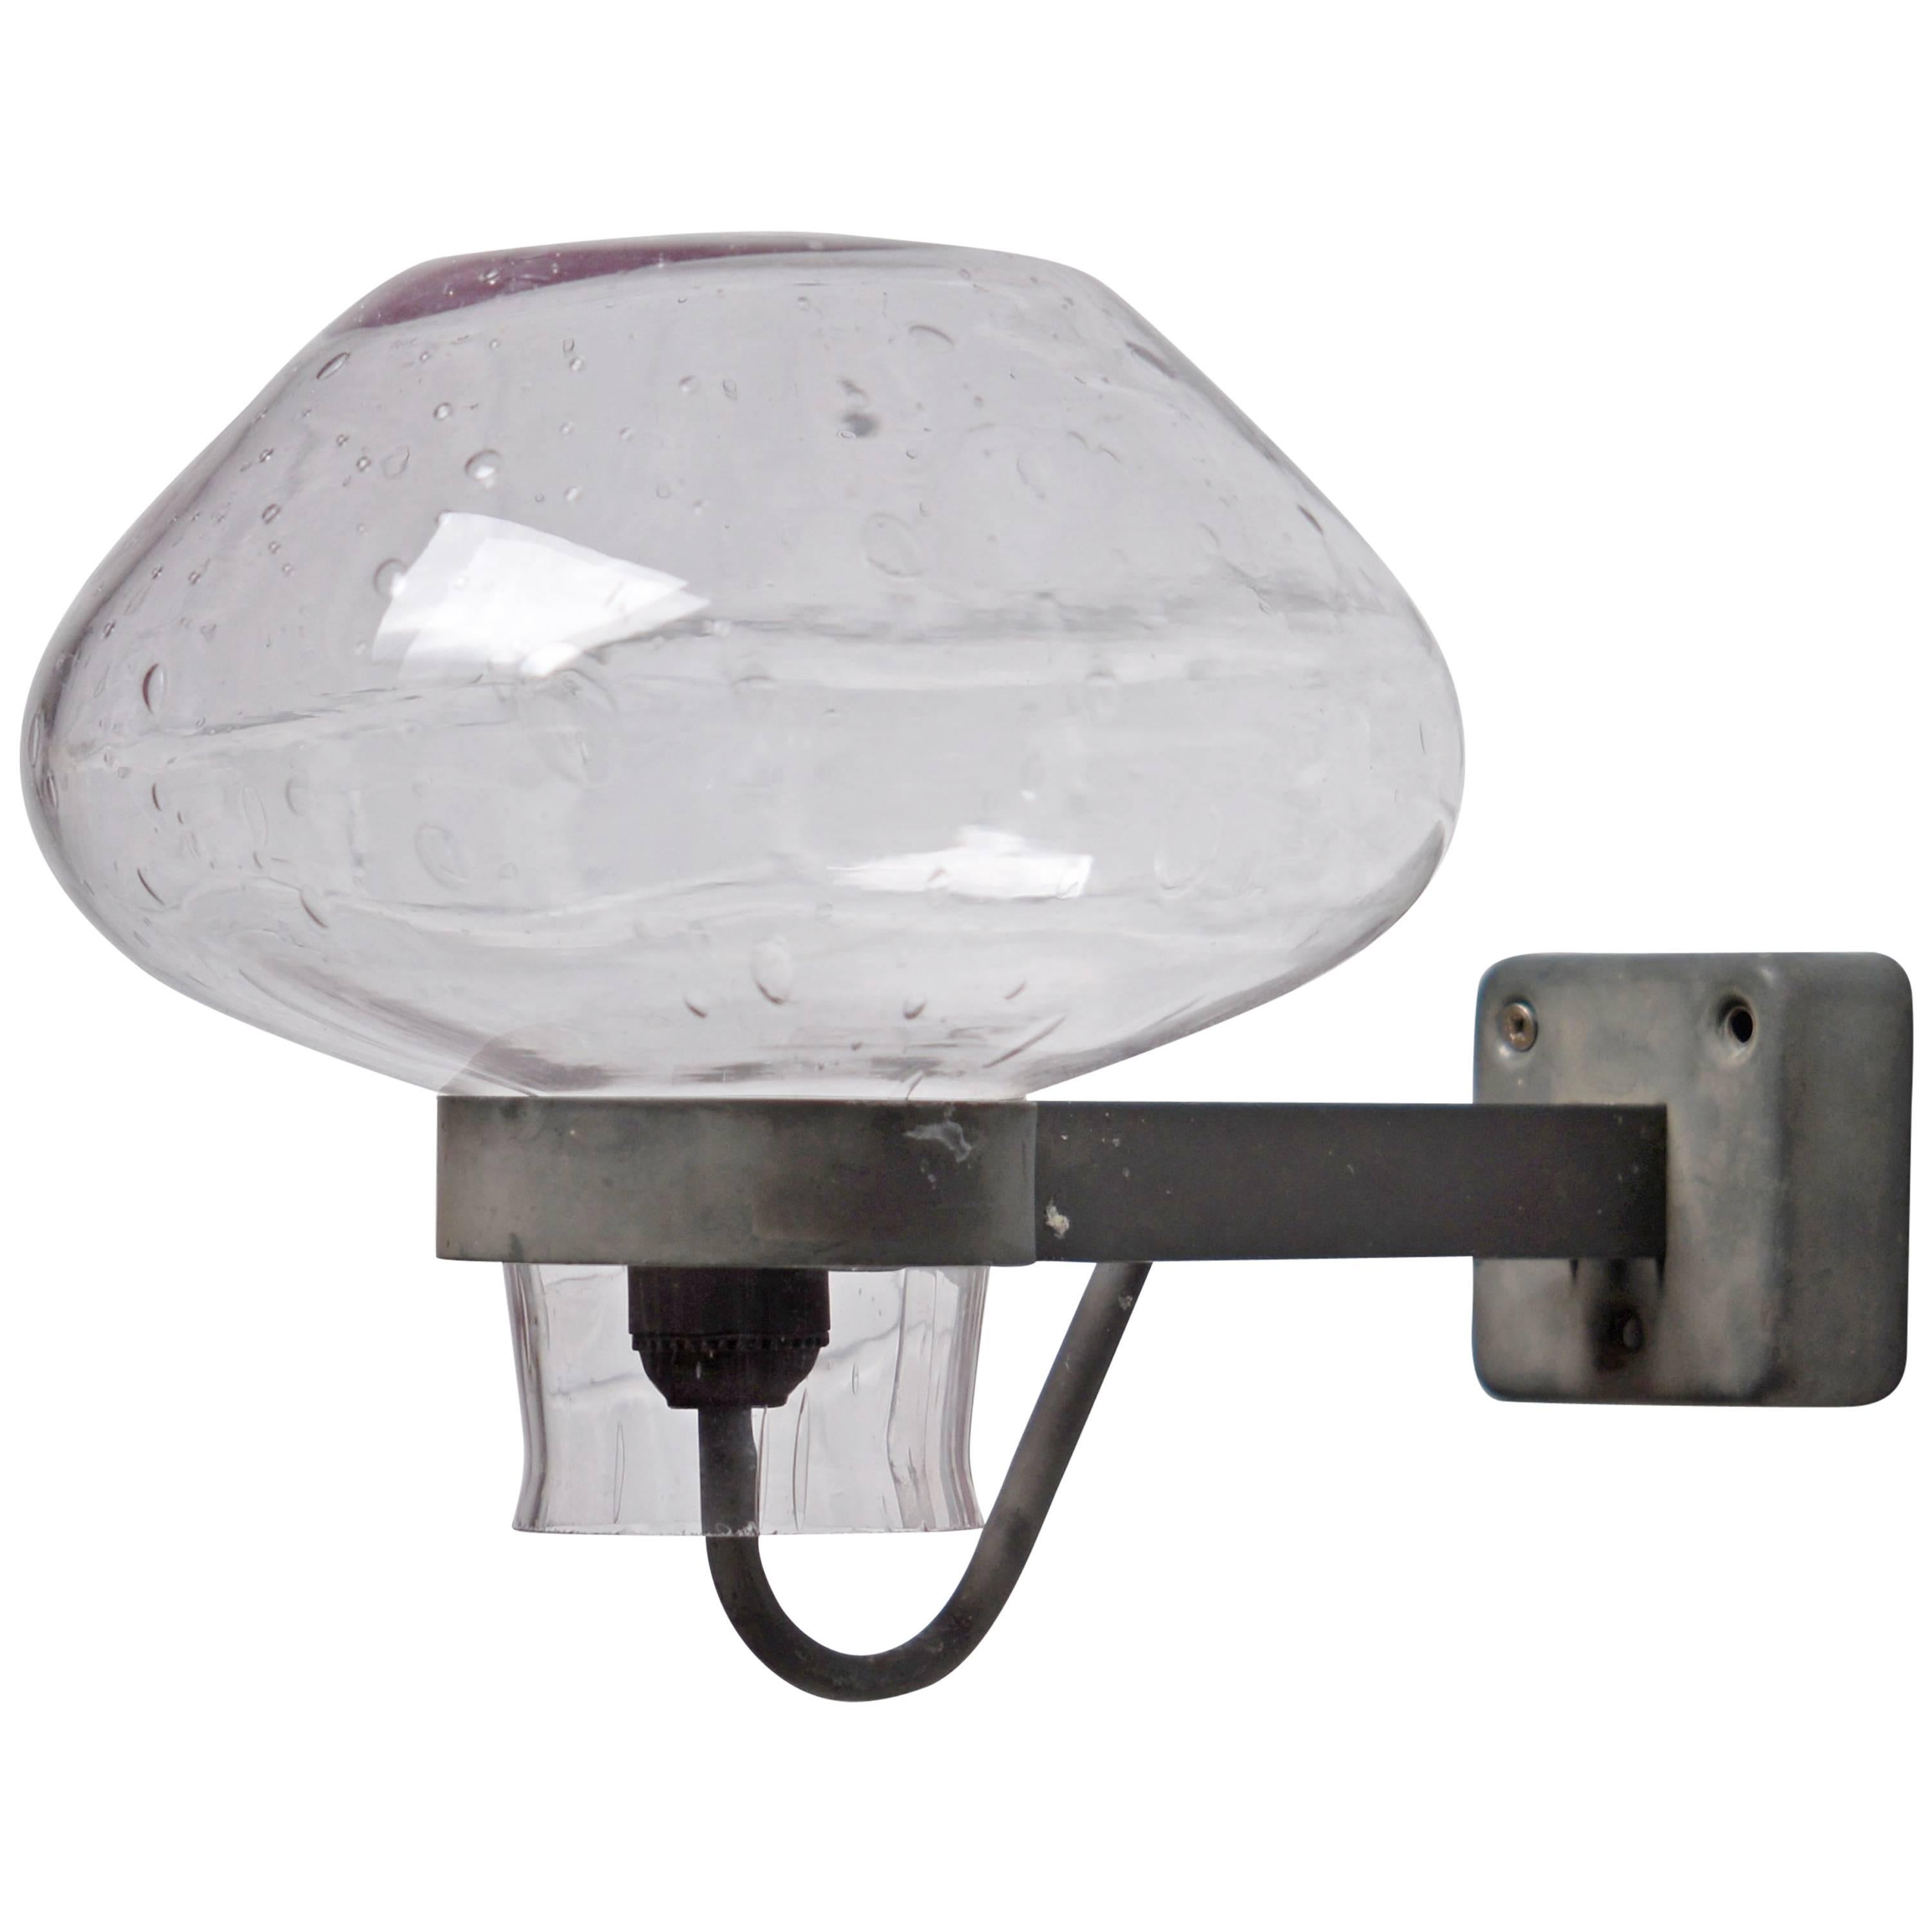 Gunnar Asplund, Large Outdoor/Indoor Glass and Metal Wall Lamp, Sweden, 1940s For Sale